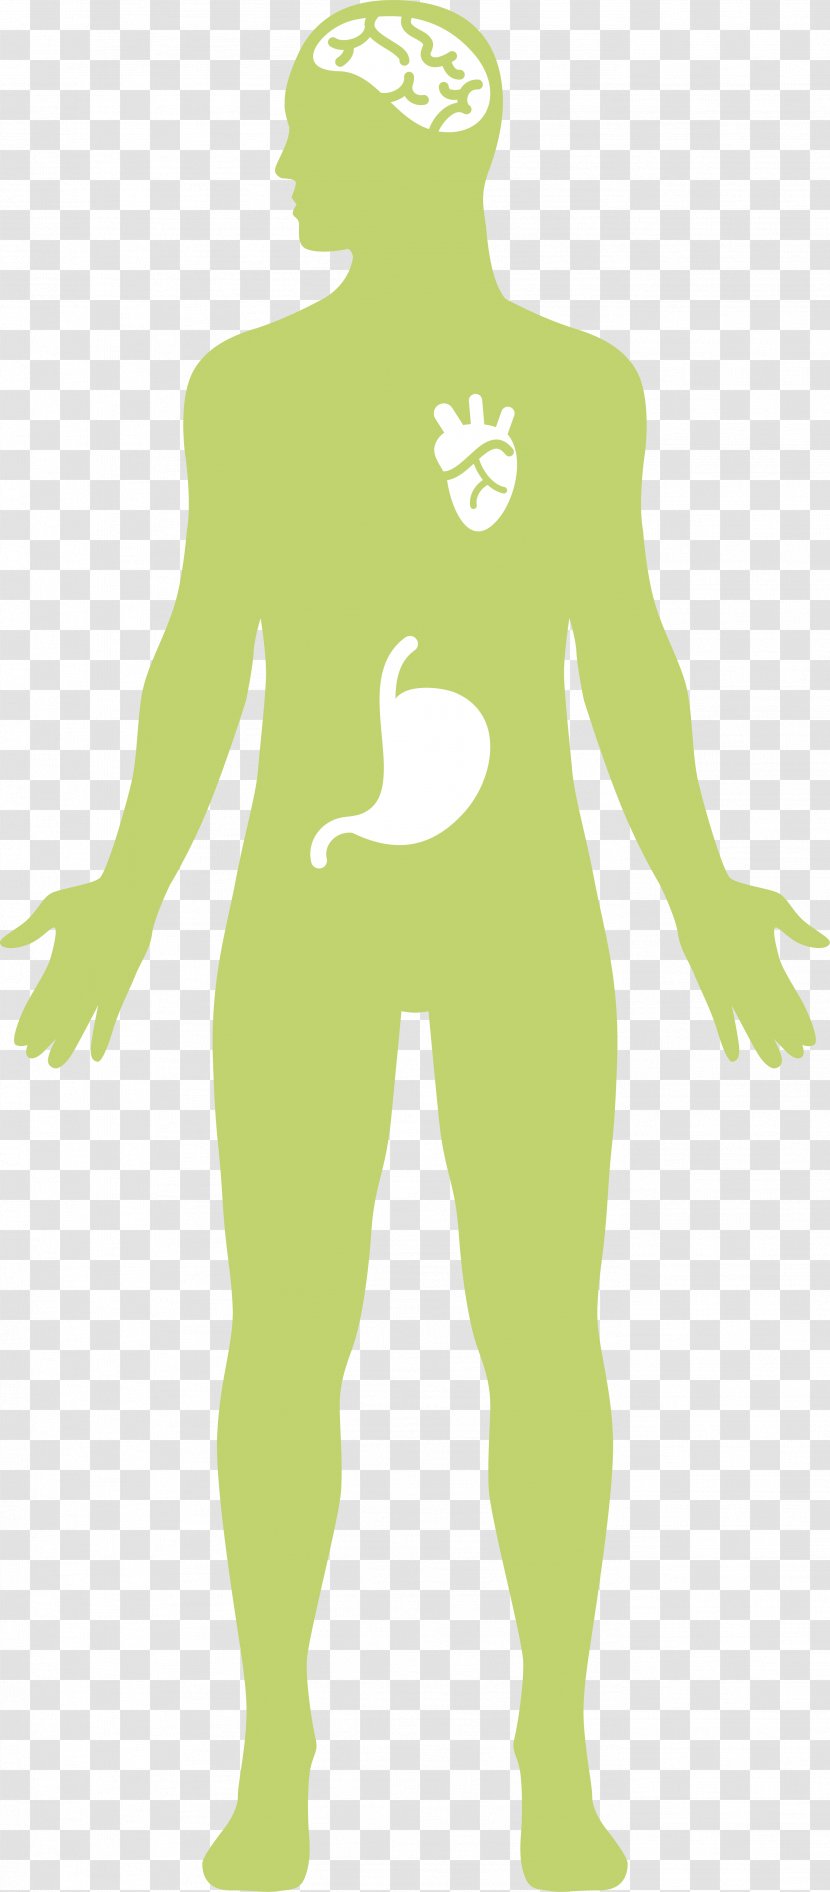 Digestion Human Digestive System Gastrointestinal Tract Physiology - Frame - Cloves Transparent PNG